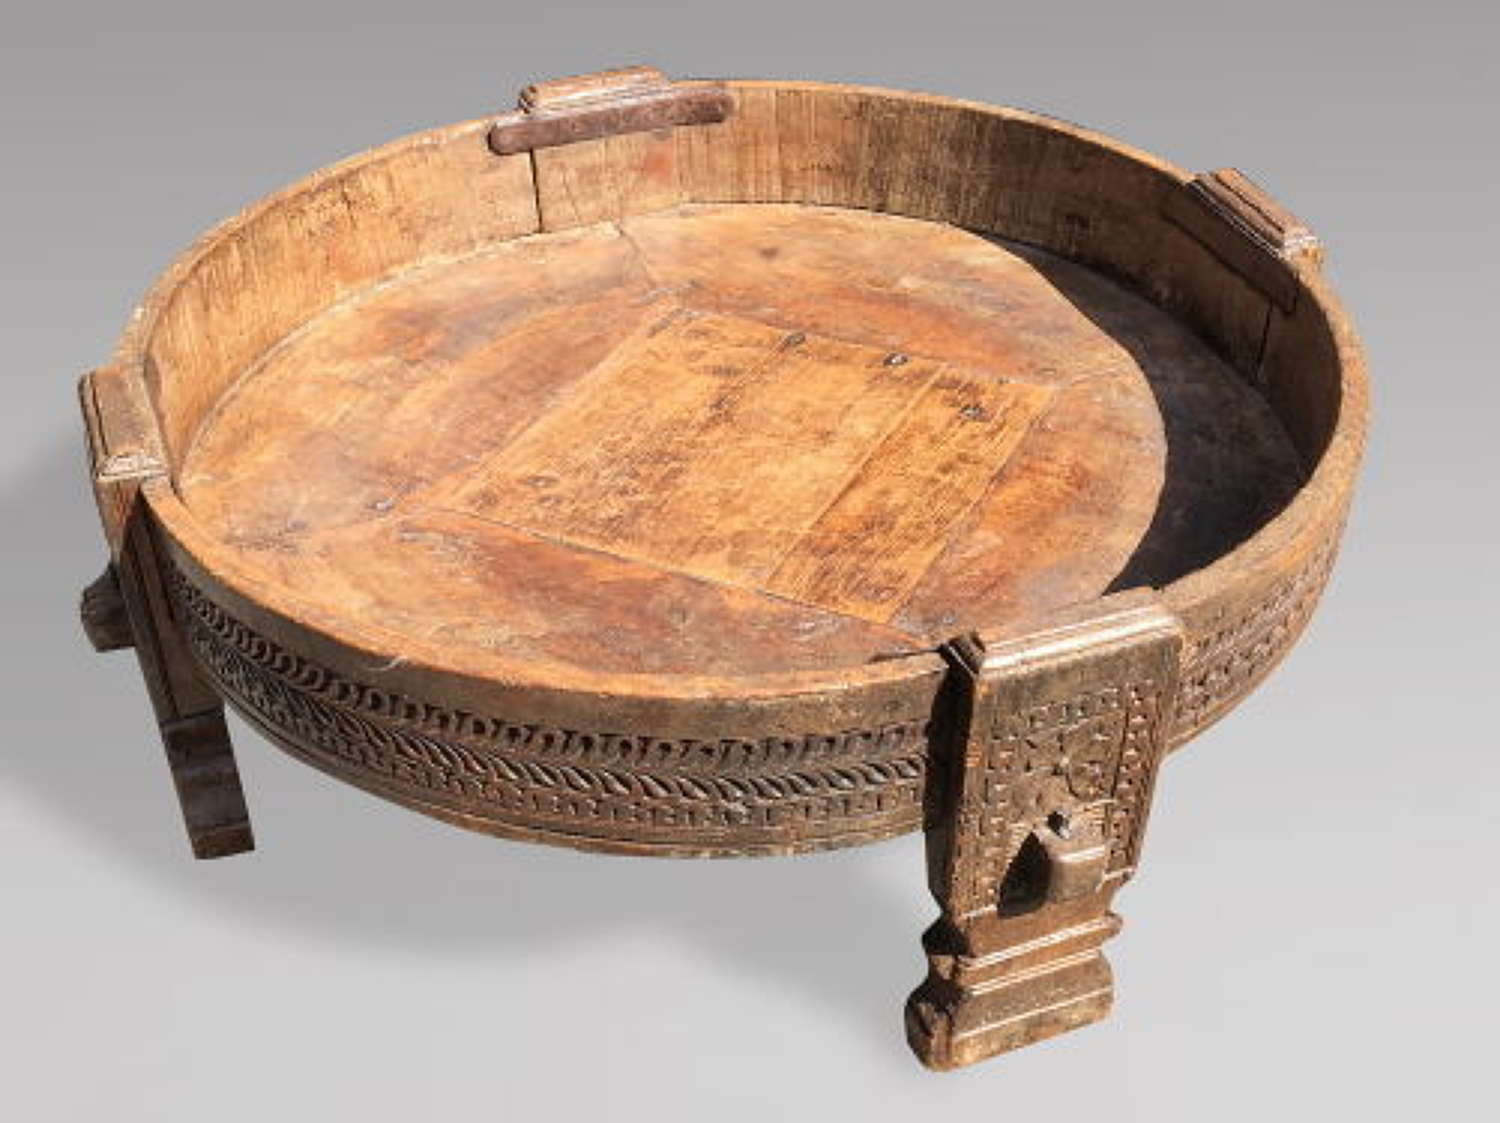 A Highly Decorative Eastern Low Table / Basket C.1850